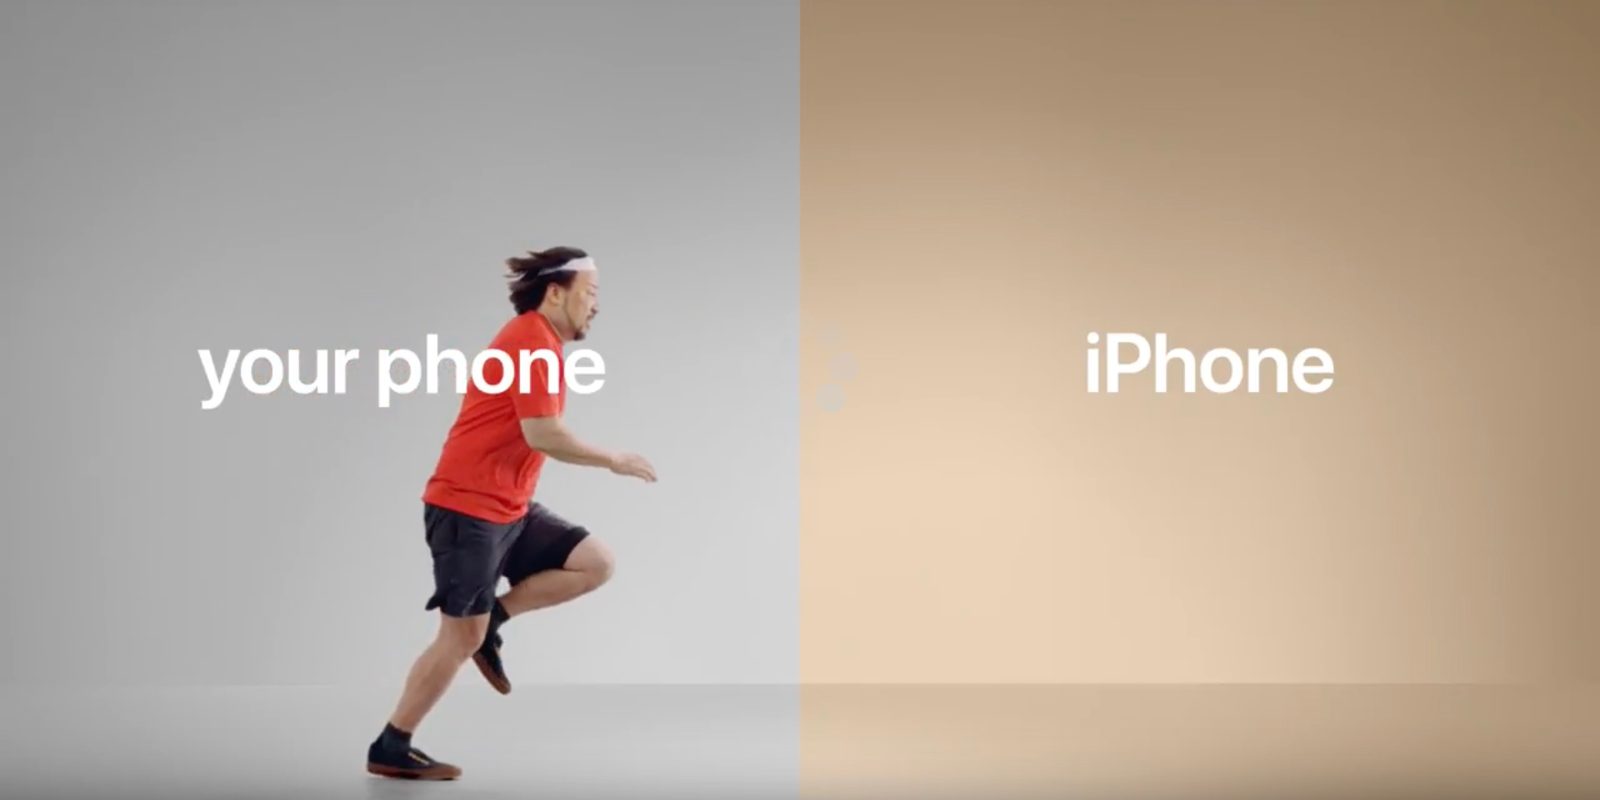 Apple targeting Android users with latest iPhone ad campaign 9to5Mac